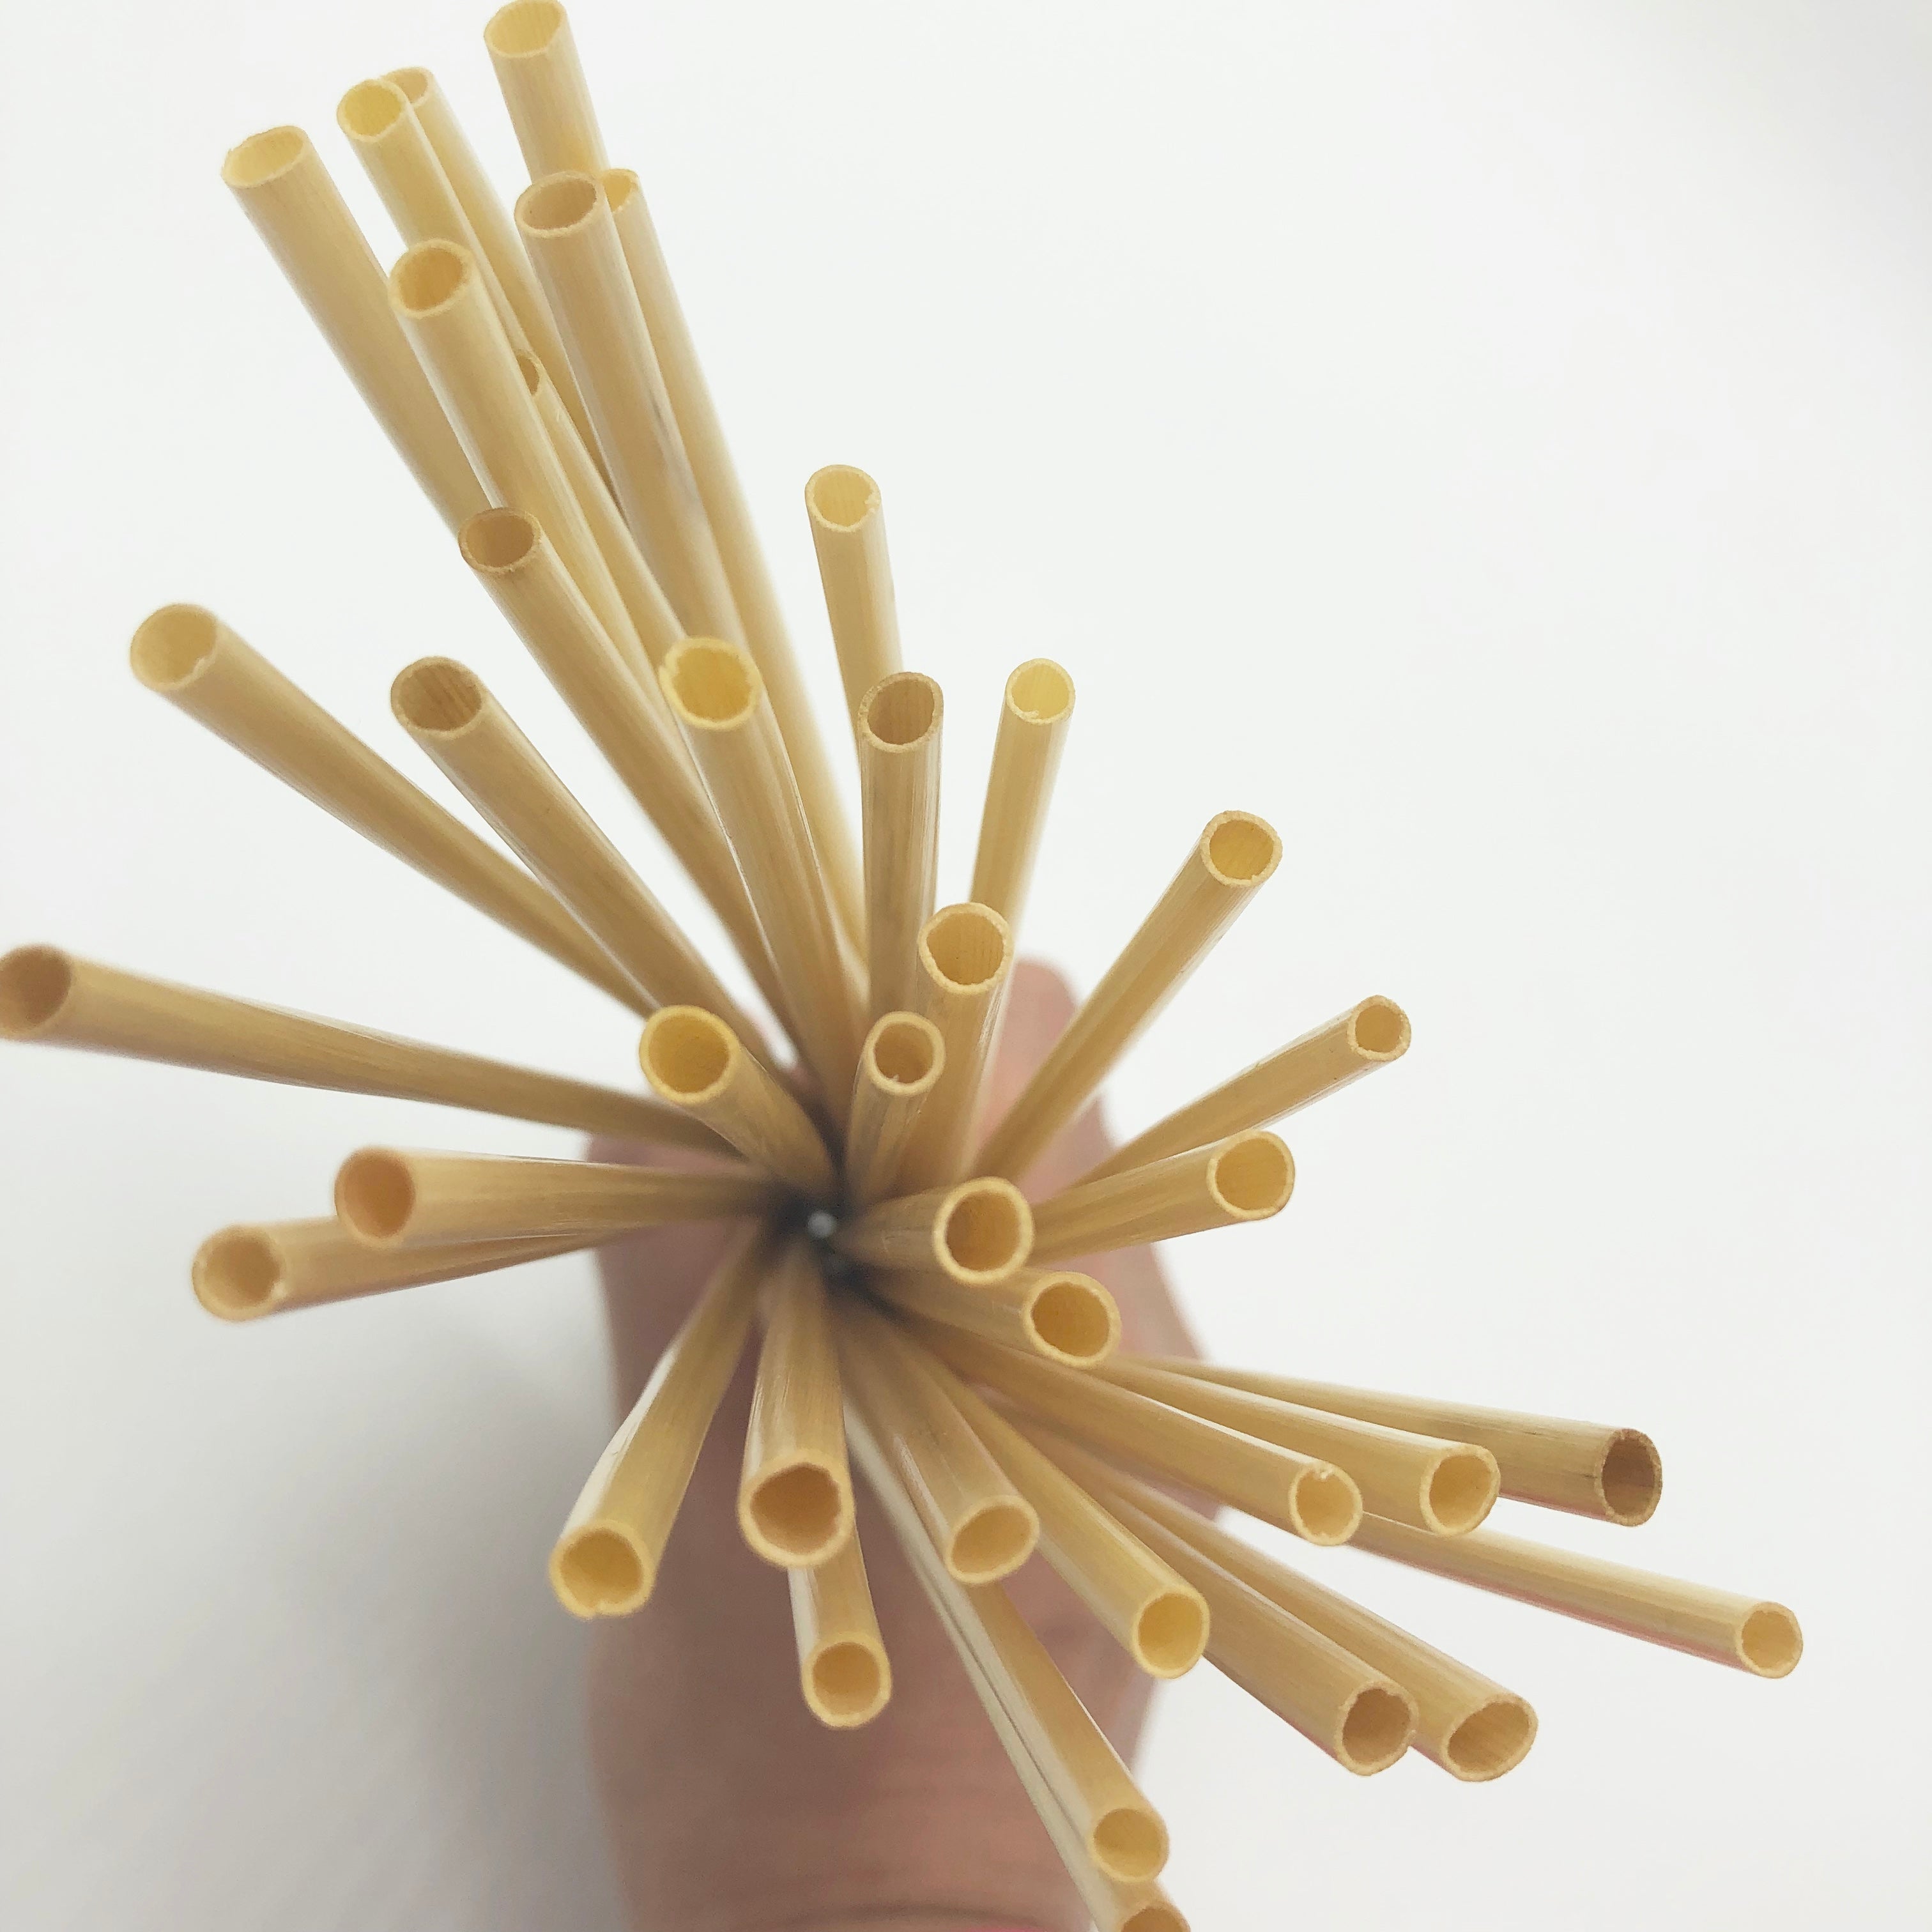 What are wheat straws made of?